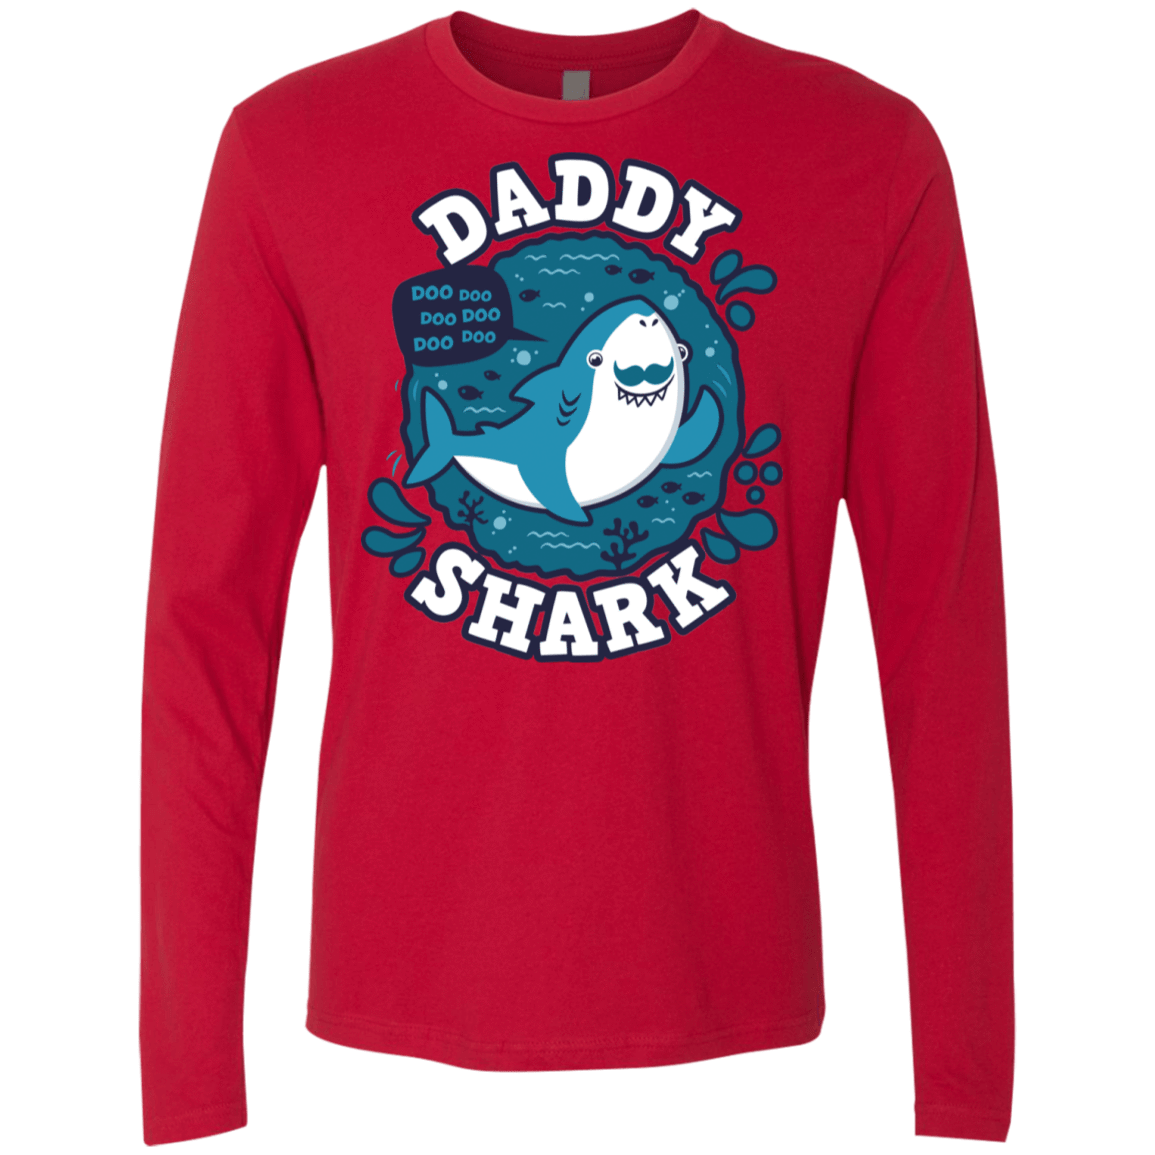 T-Shirts Red / S Shark Family trazo - Daddy Men's Premium Long Sleeve